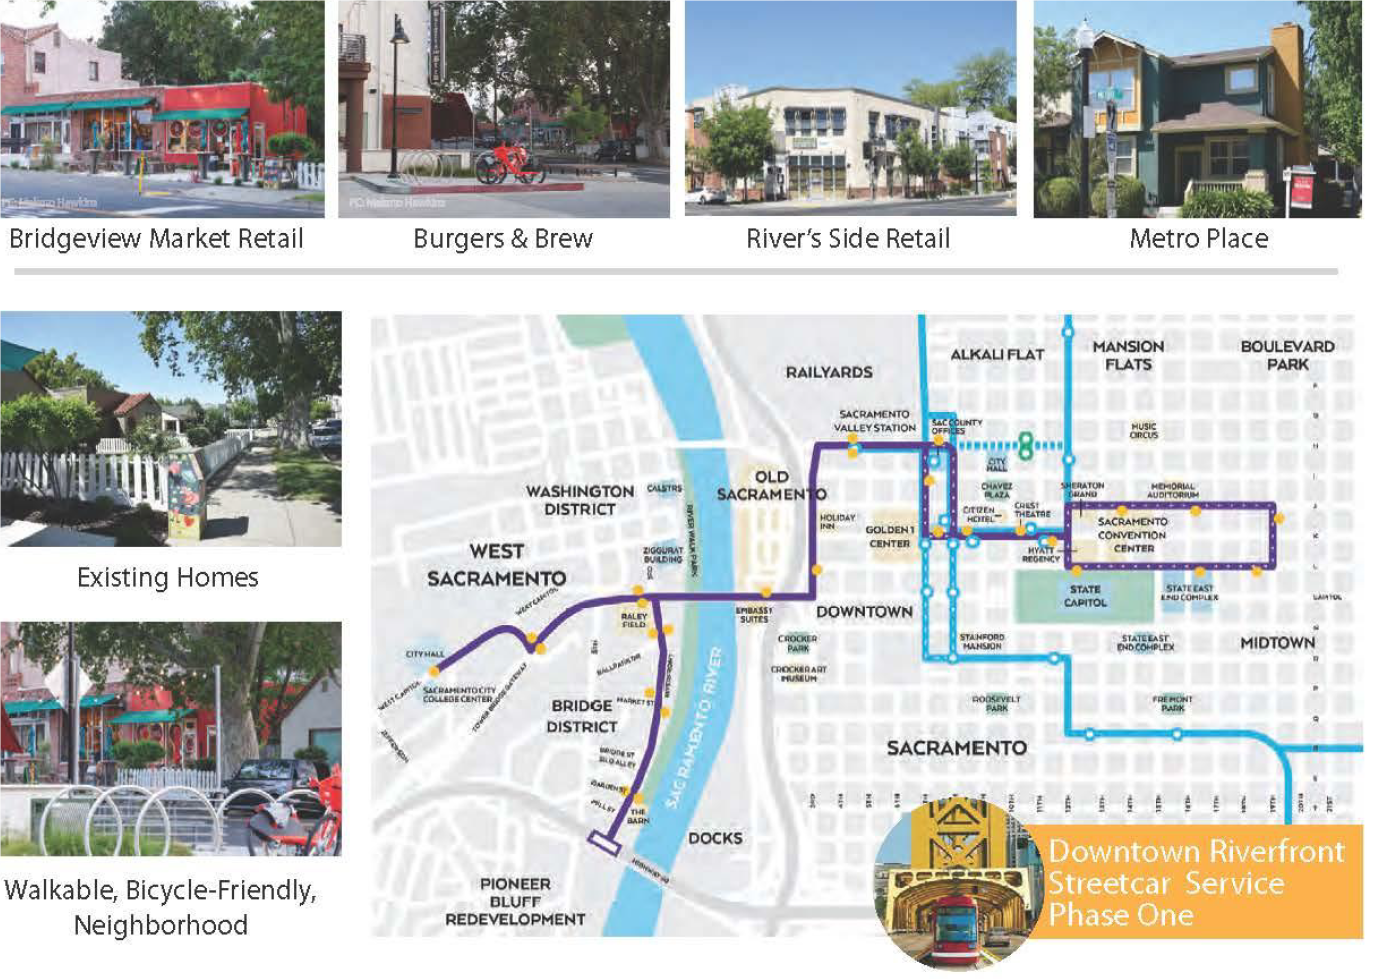 Photo collage showing varies retail markets, homes, and a map of Downtown Riverfront